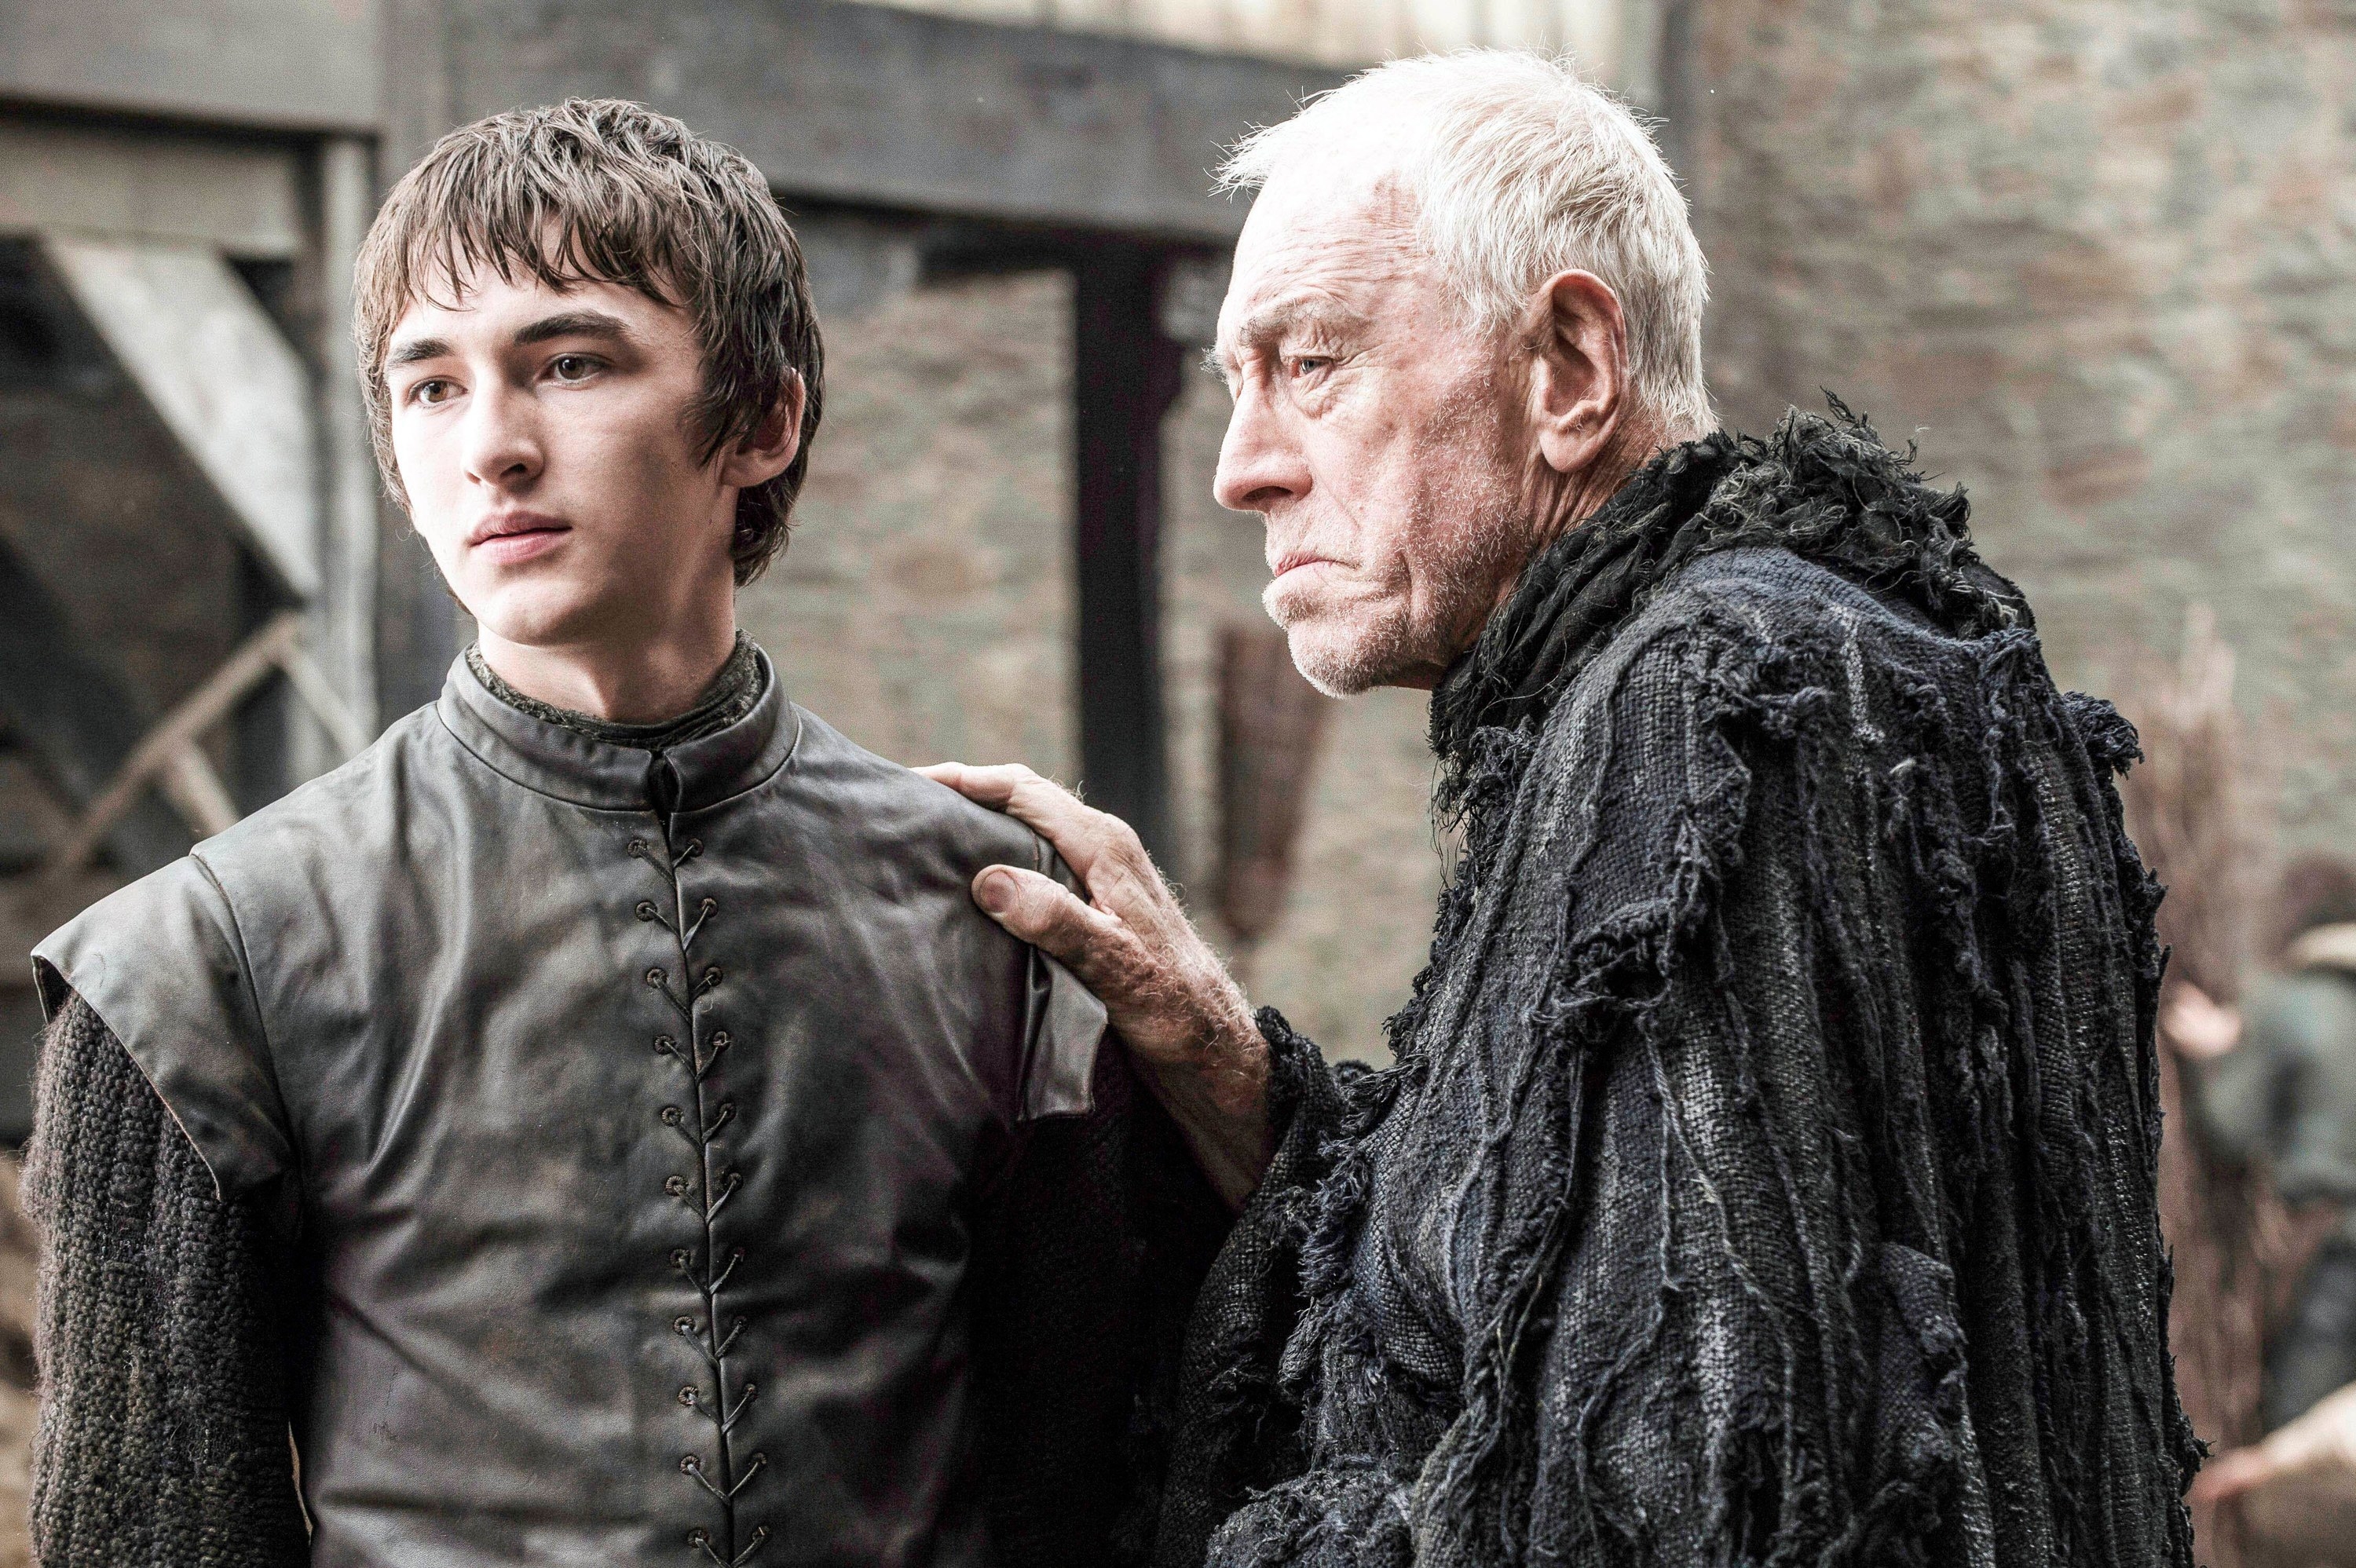 Isaac Hempstead Wright as Bran Stark in &quot;Game of Thrones&quot;